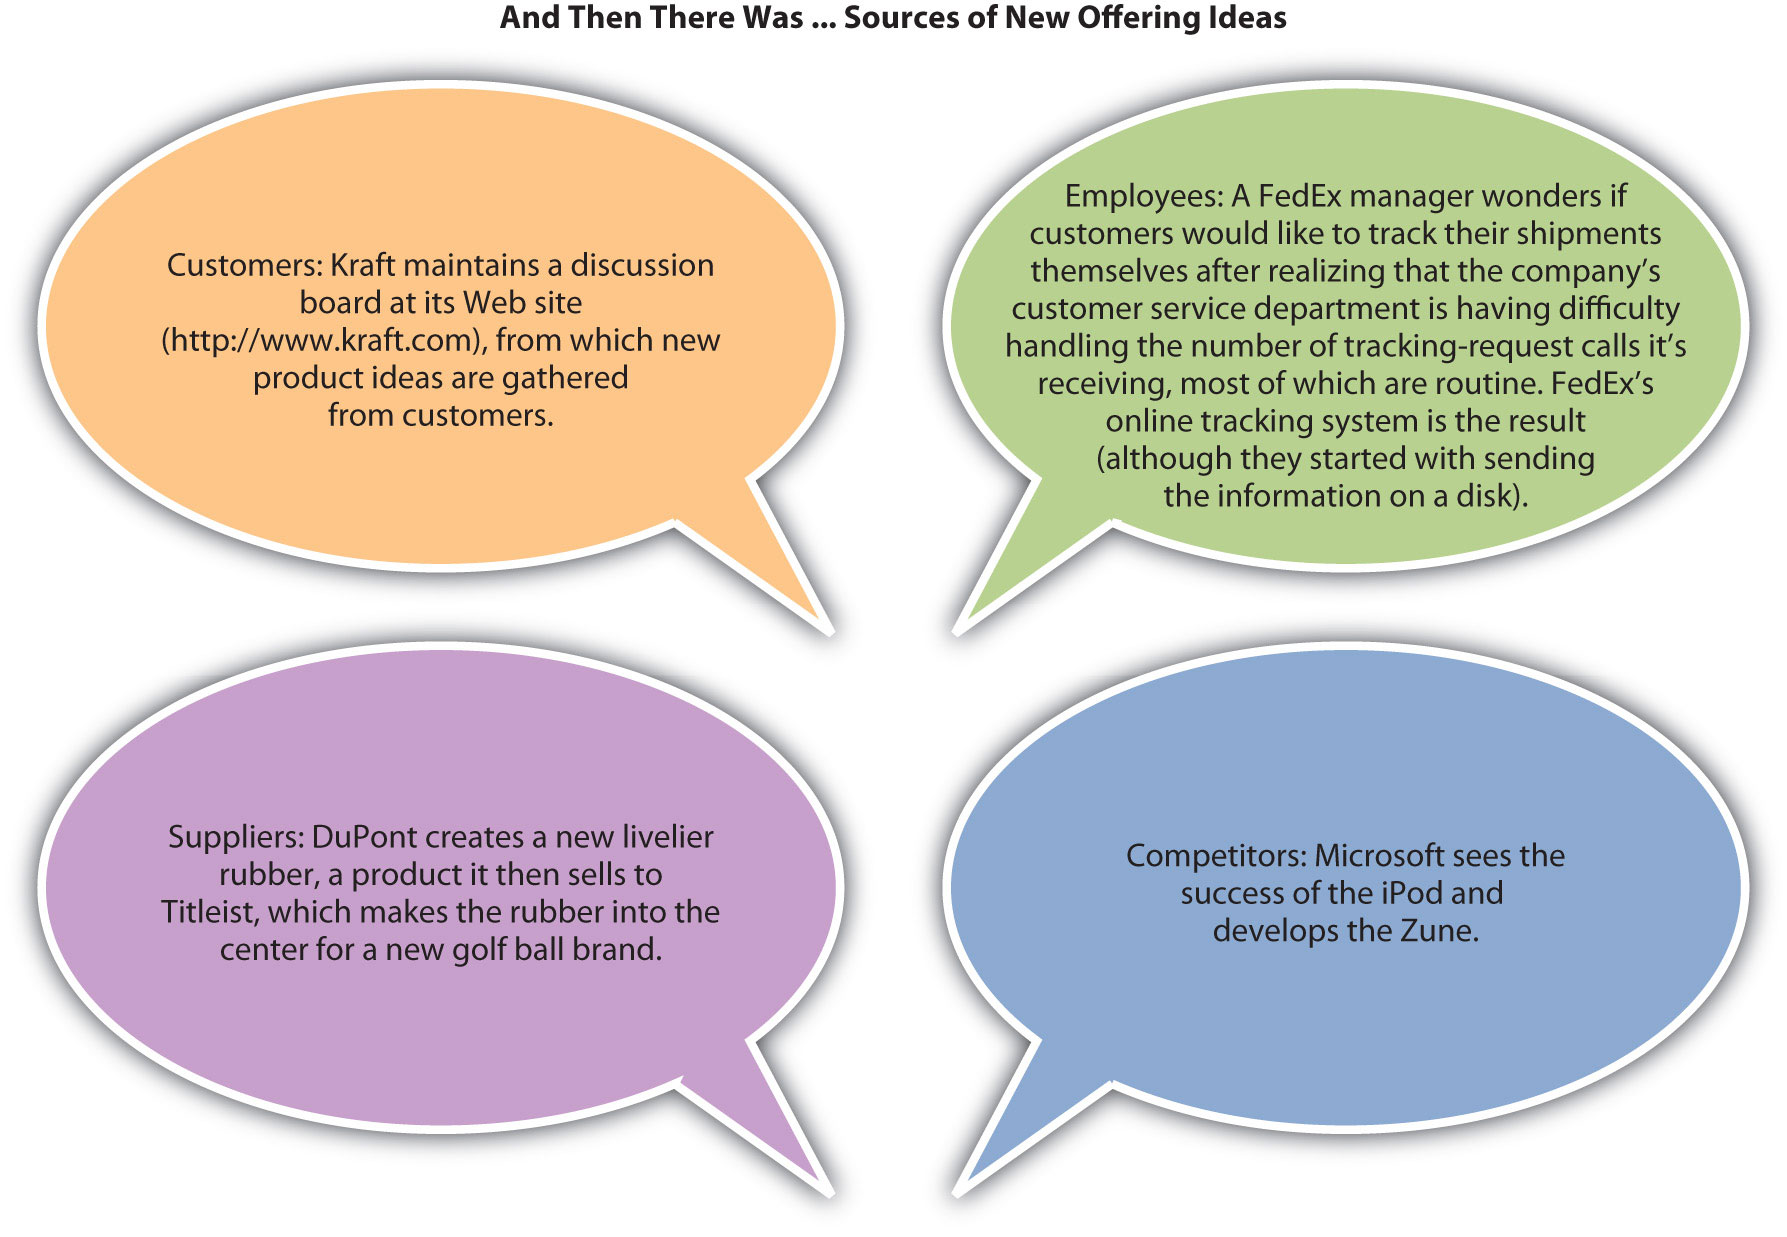 New Offering Ideas. Customers: Kraft maintains a discussion board at its Web site